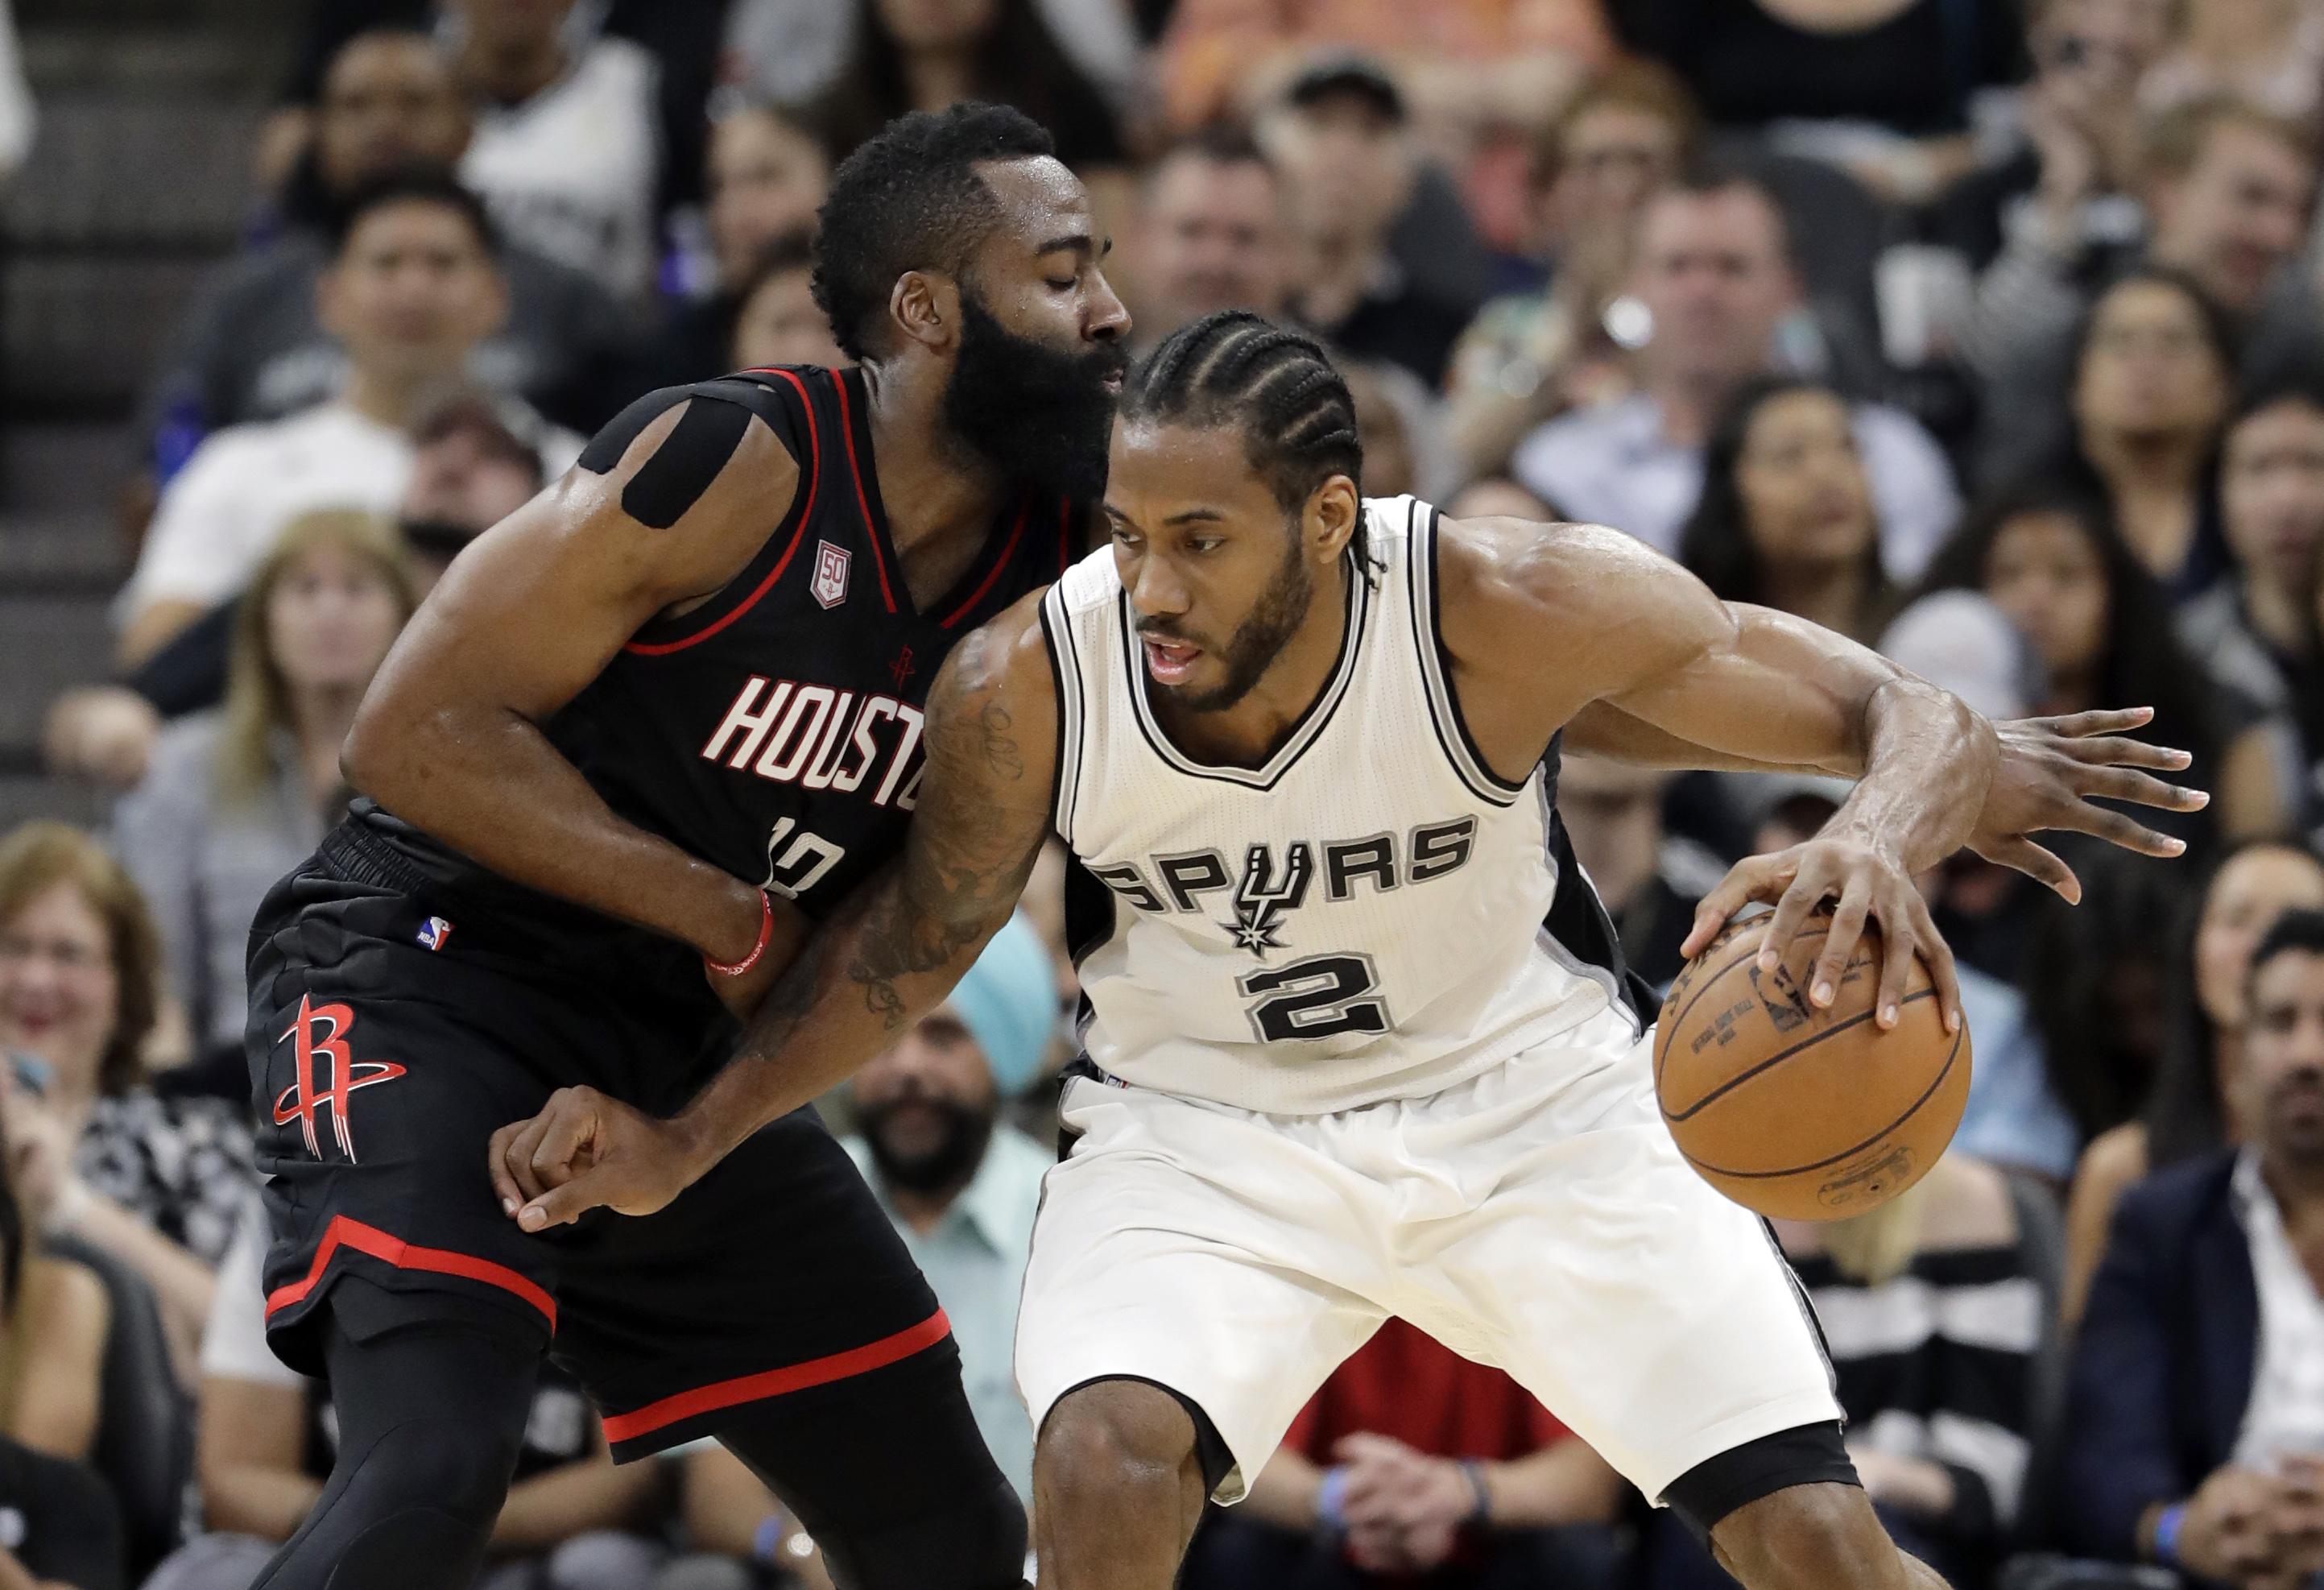 San Antonio Spurs forward Kawhi Leonard (2) works for an opportunity to the basket as Houston Rockets' James Harden, left, defends during the first half of Game 2 in a second-round NBA basketball playoff series, Wednesday, May 3, 2017, in San Antonio. (AP Photo/Eric Gay)